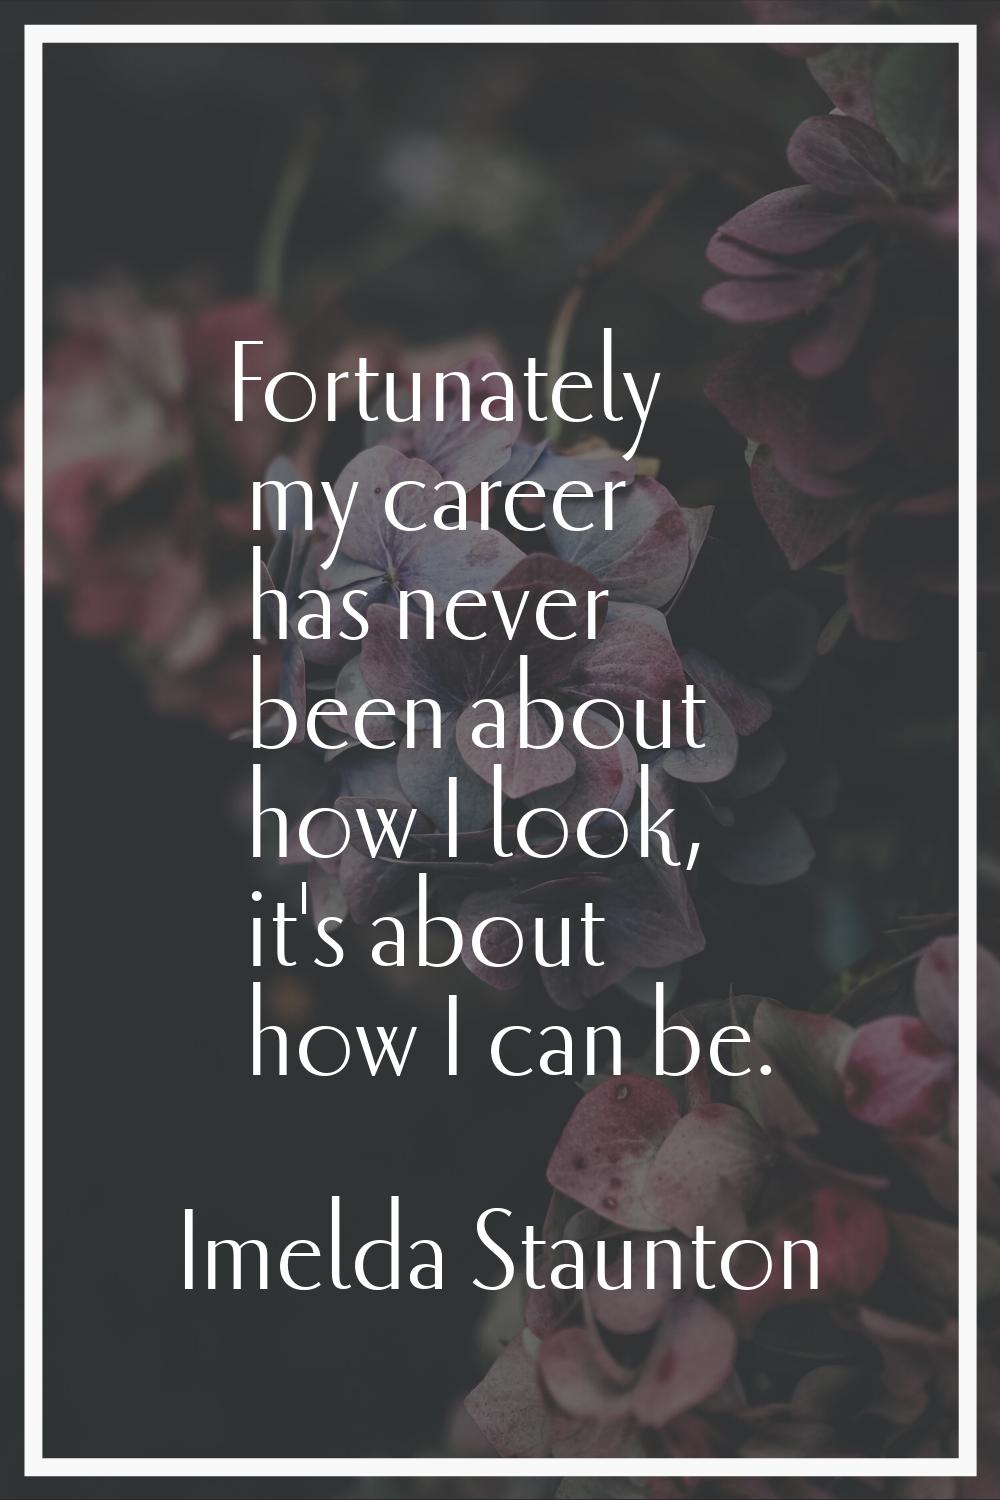 Fortunately my career has never been about how I look, it's about how I can be.